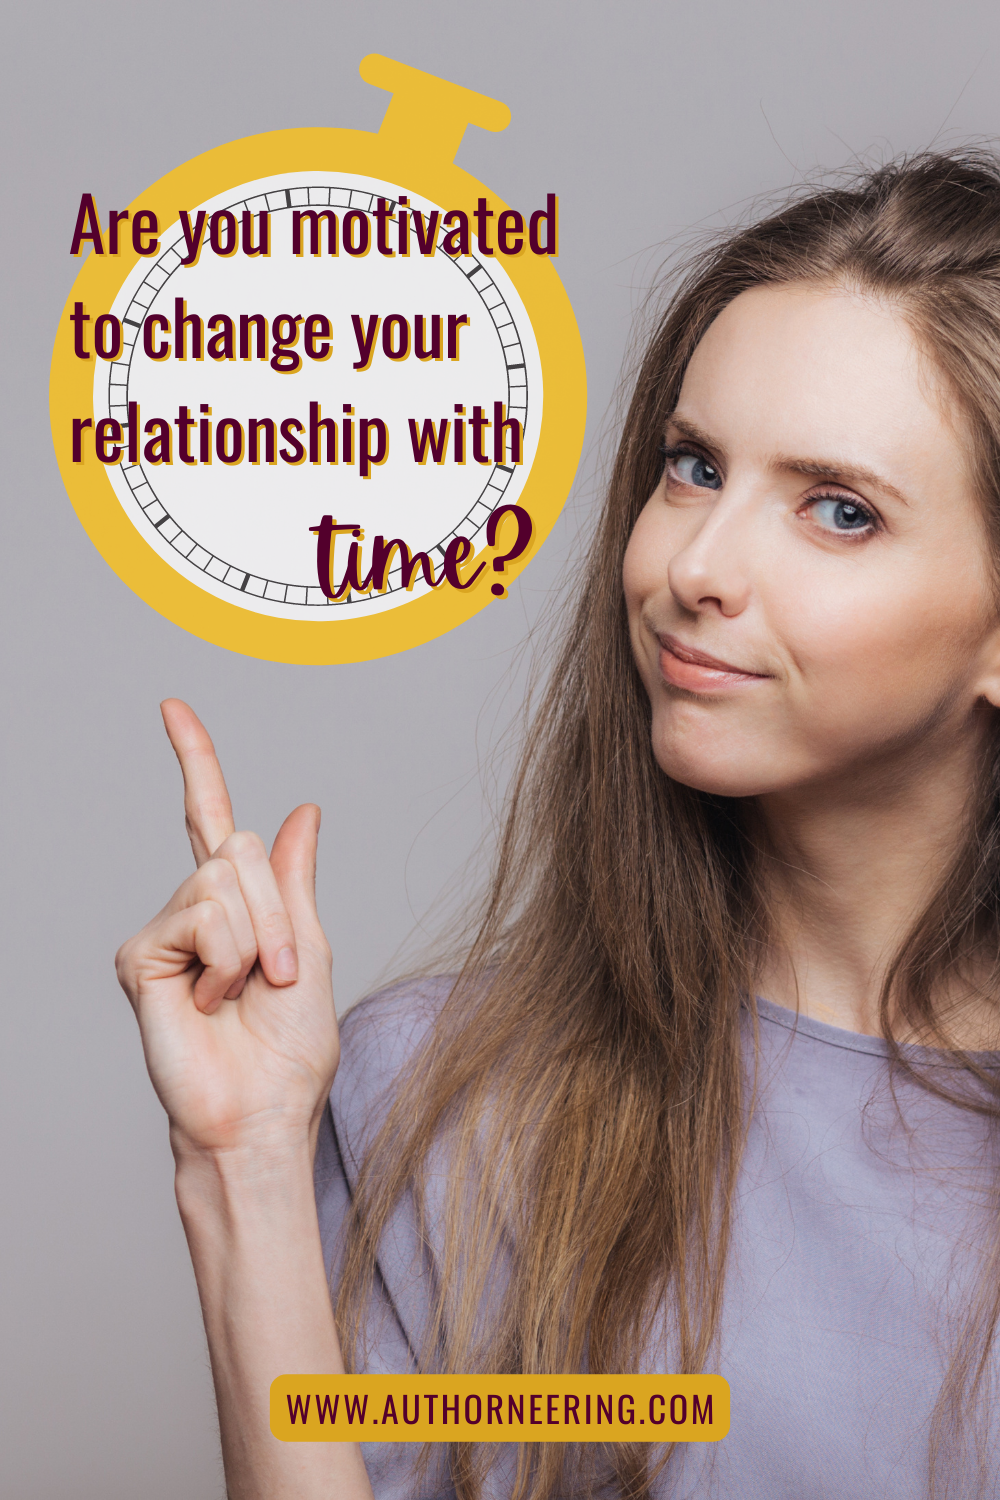 Are you motivated to change your relationship with time?